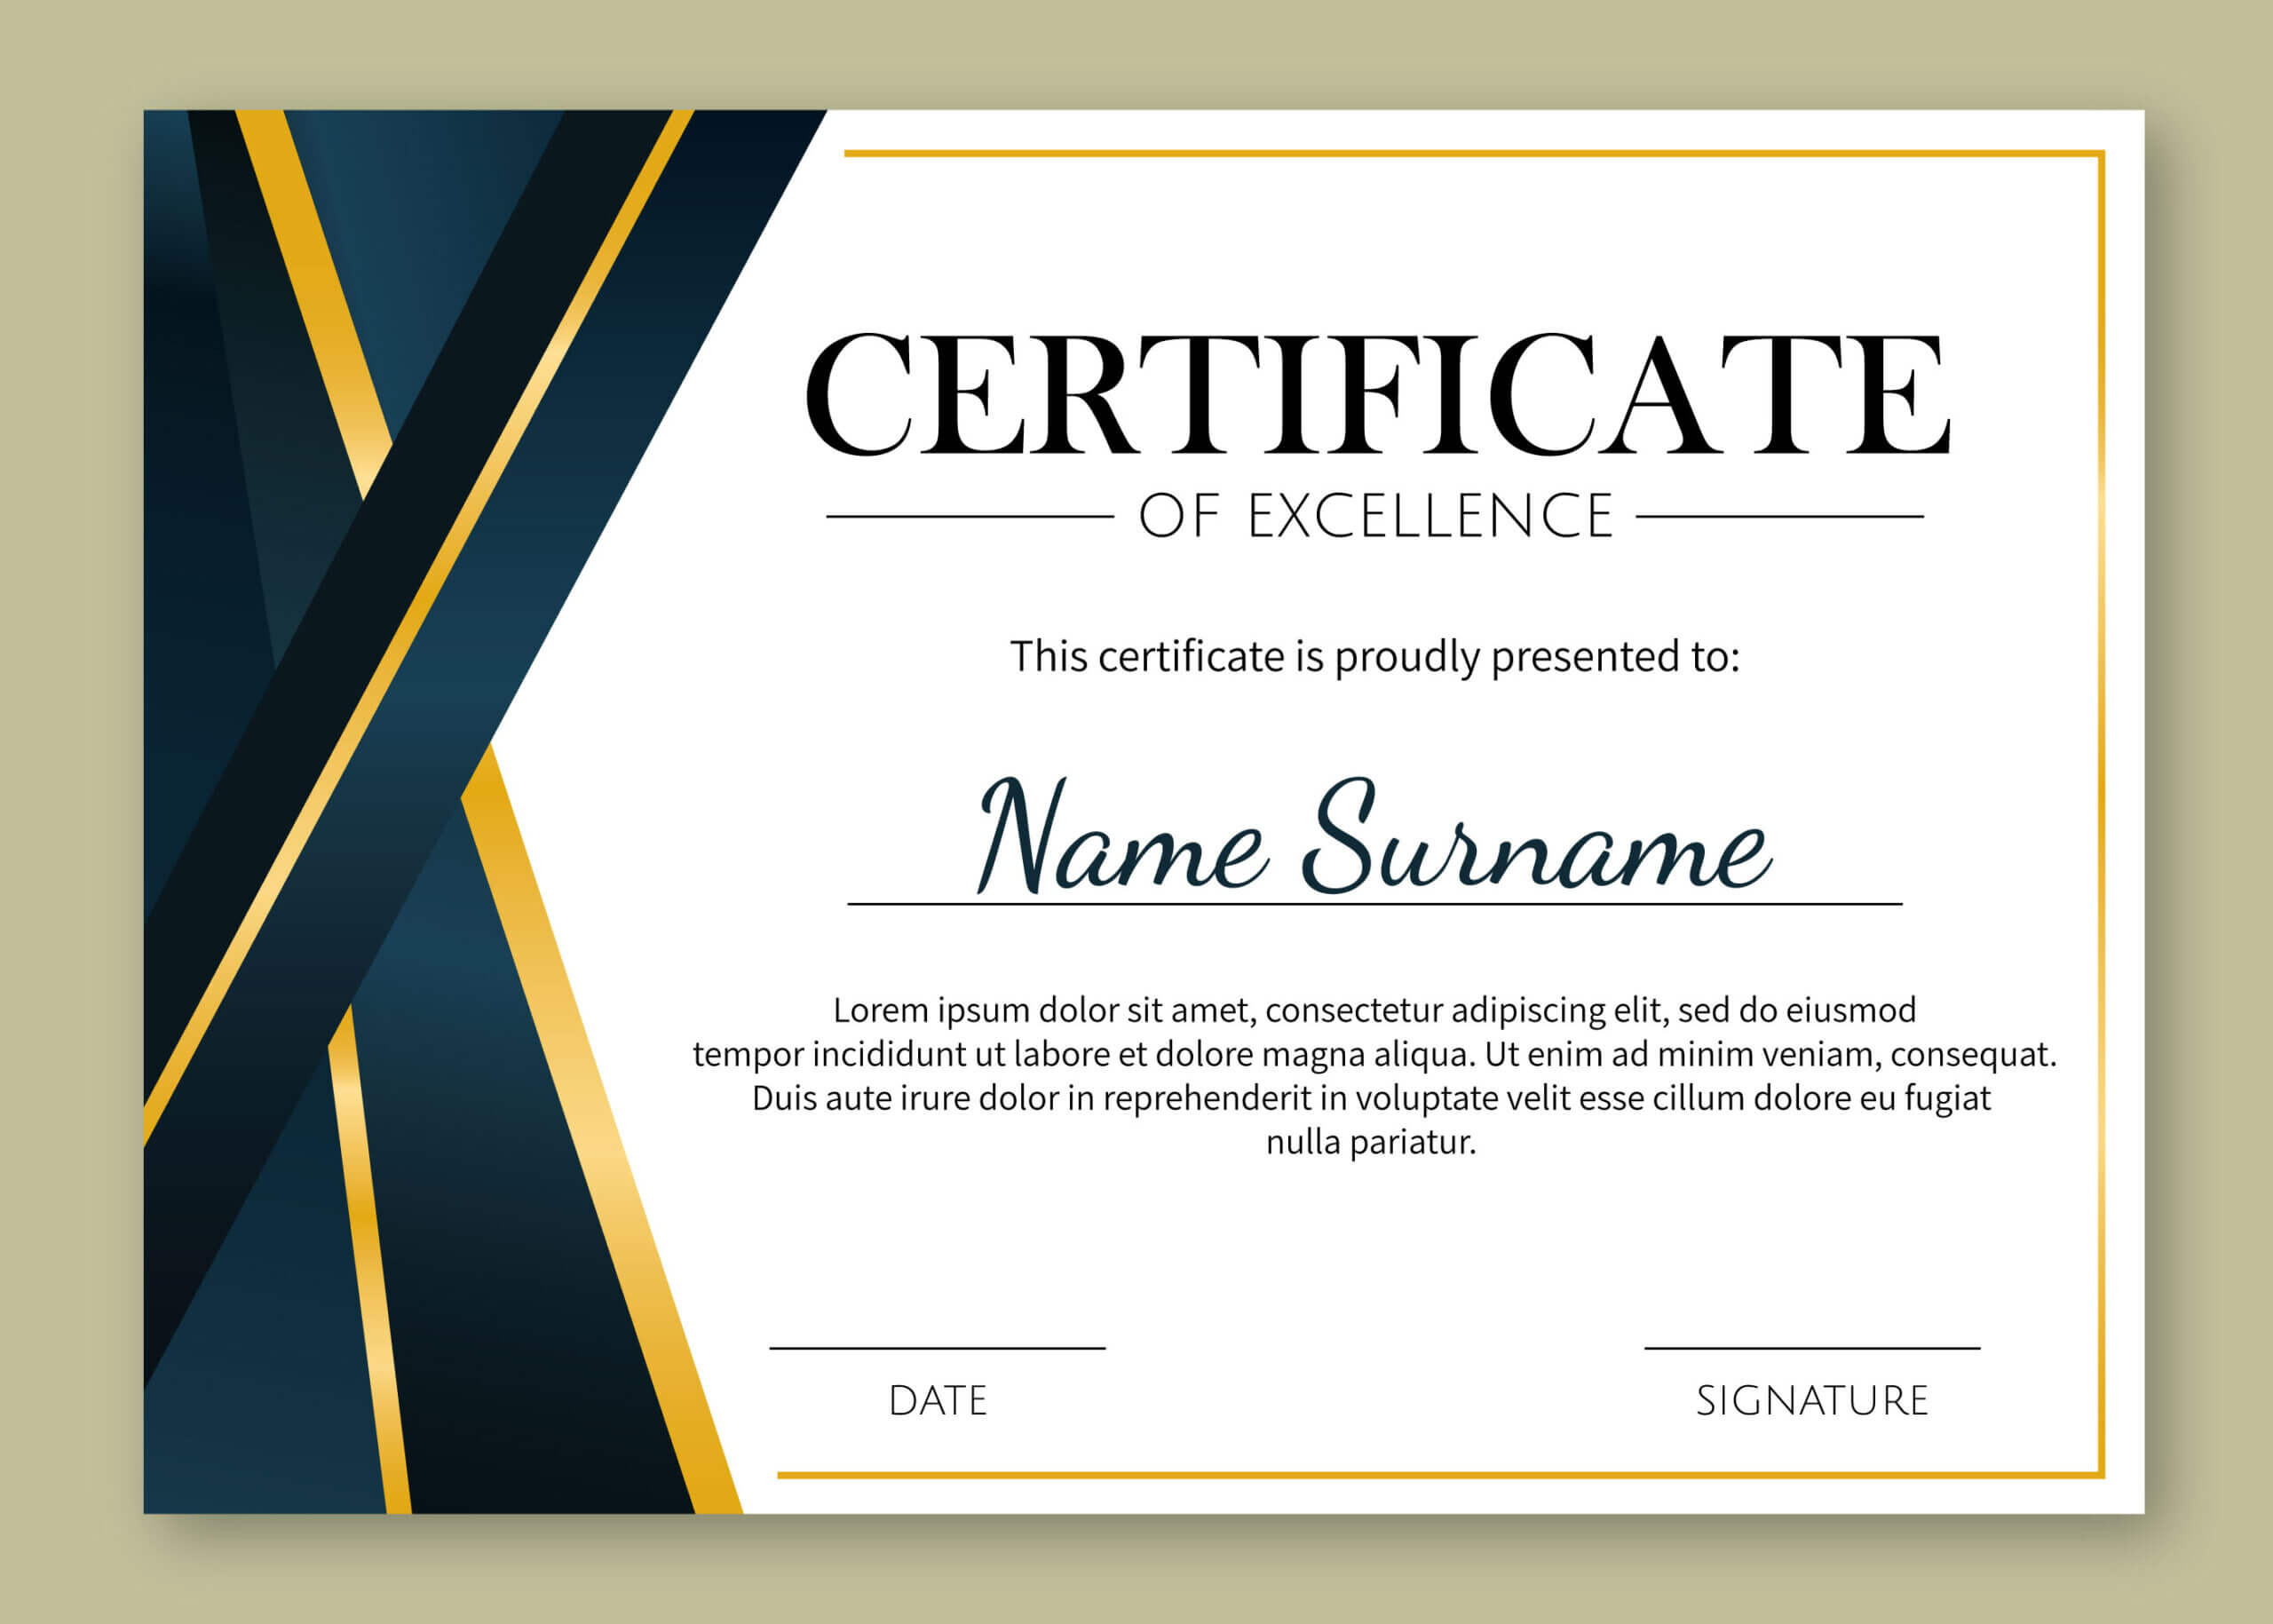 Certificate Of Excellence Template Free Download For Certificate Of Excellence Template Free Download